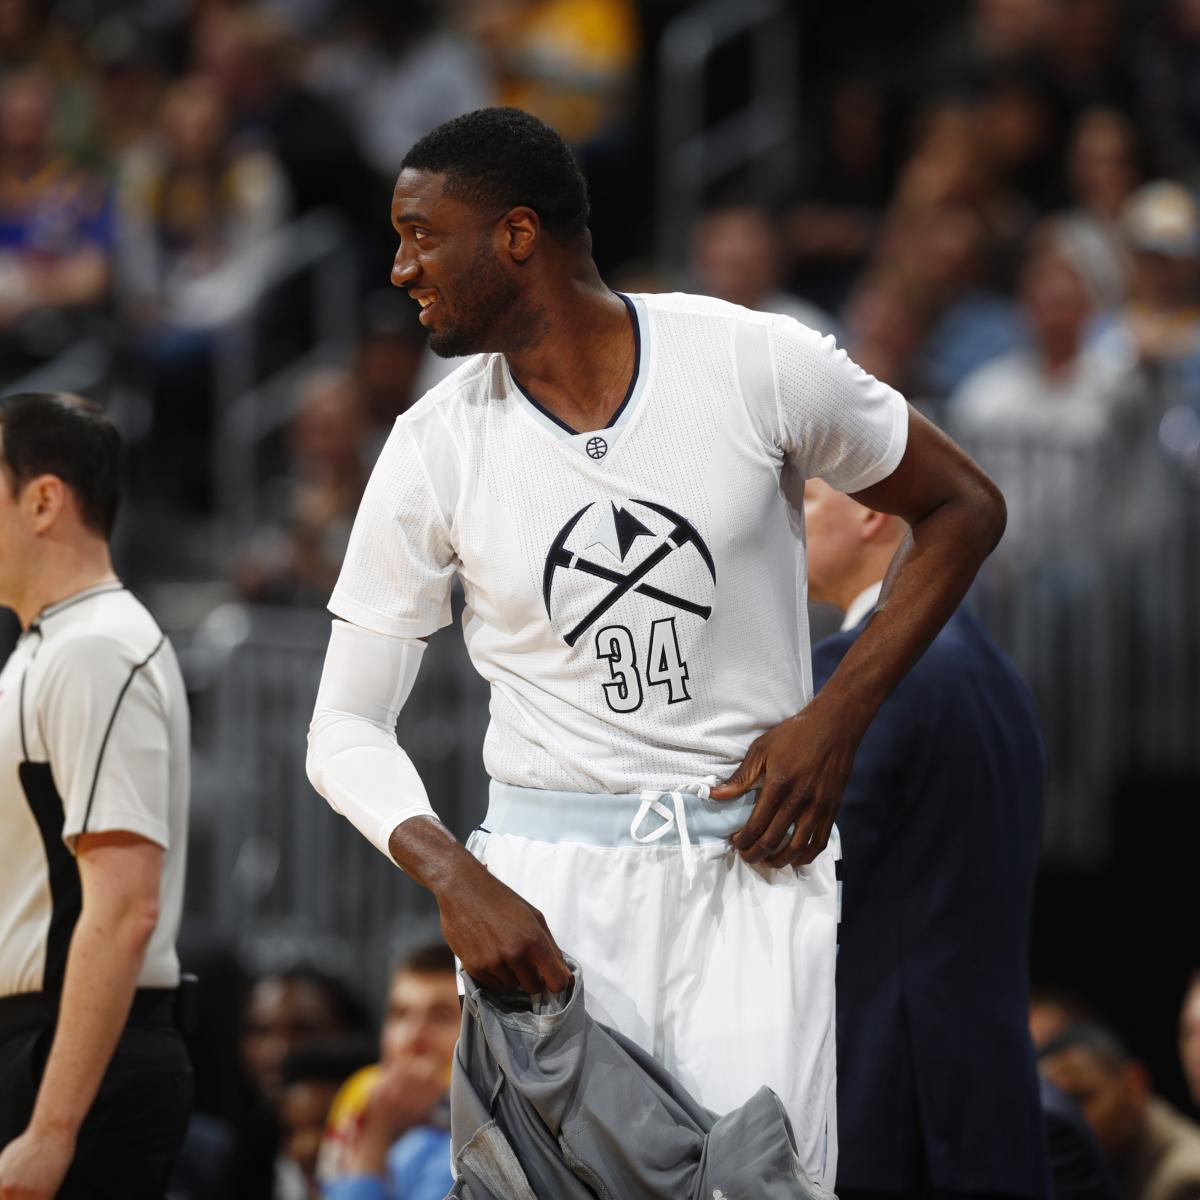 Report: Sixers hire Hibbert to player development coaching role